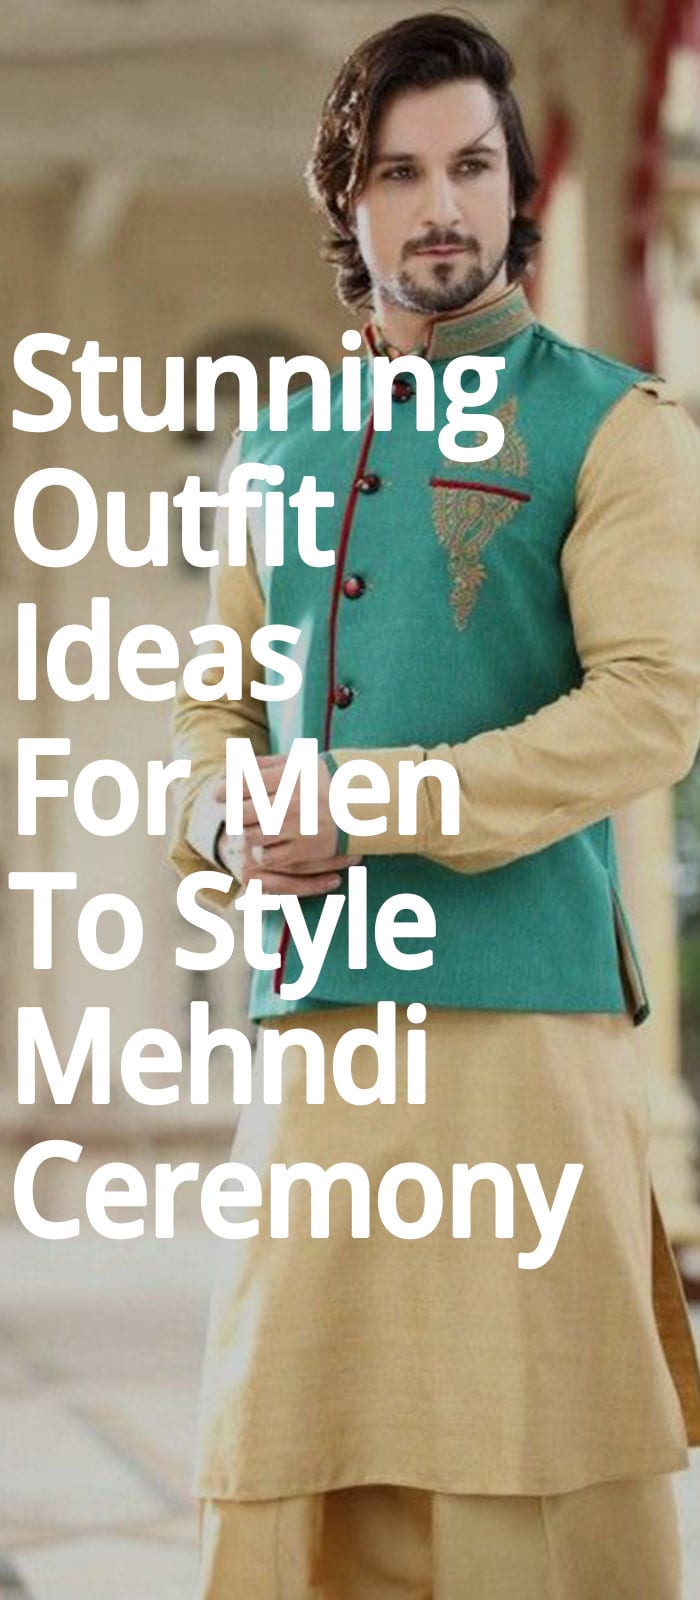 Stunning Outfit Ideas For Men To Style Mehndi Ceremony